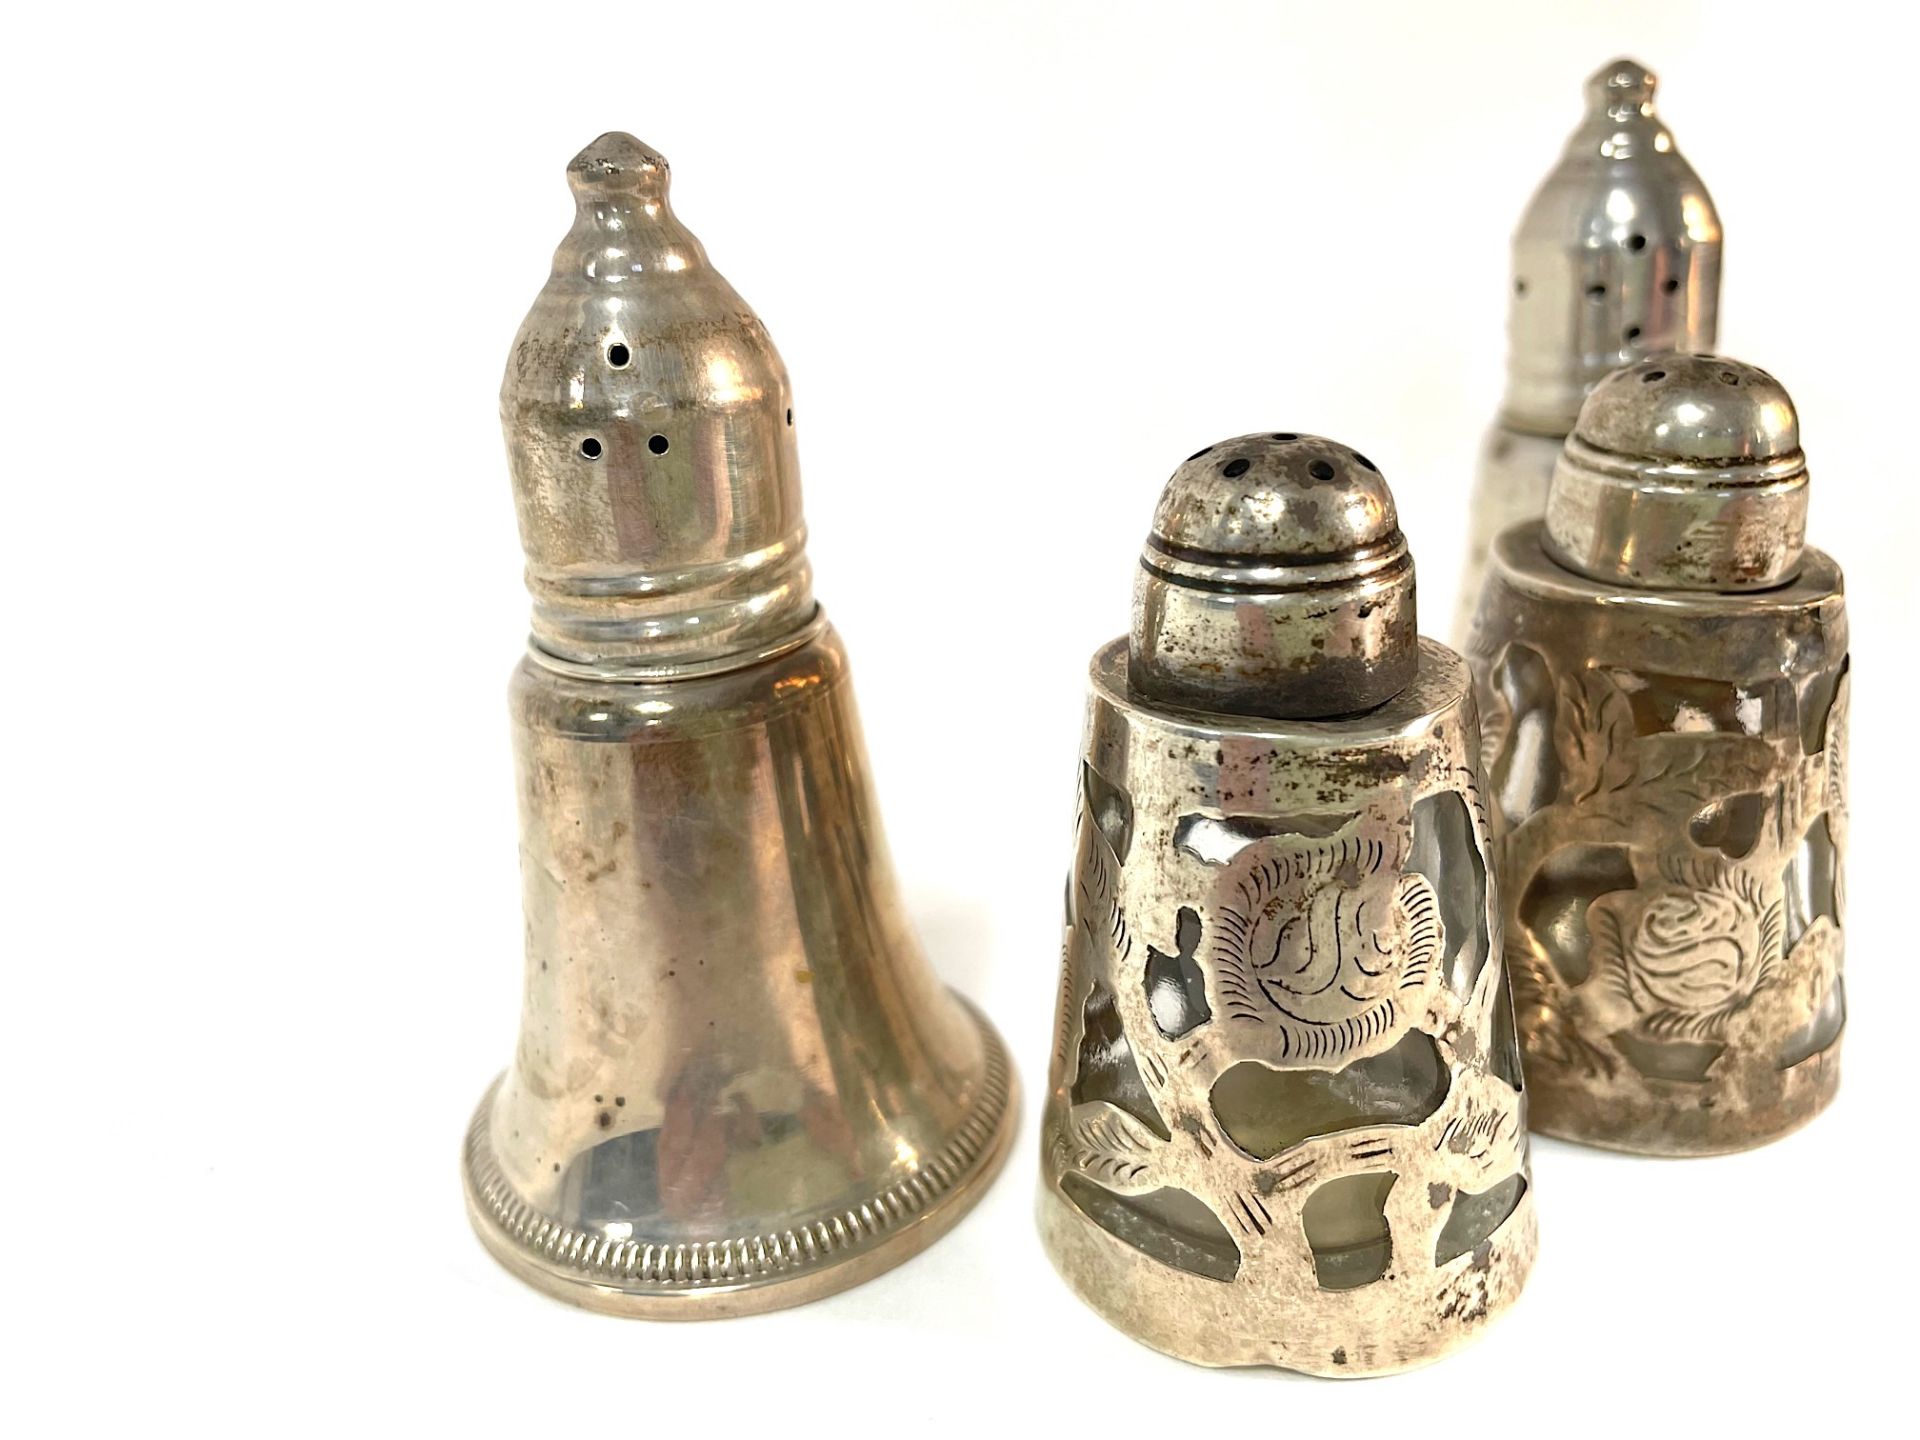 40 pairs of salt/pepper and spice shakers, - Image 75 of 88